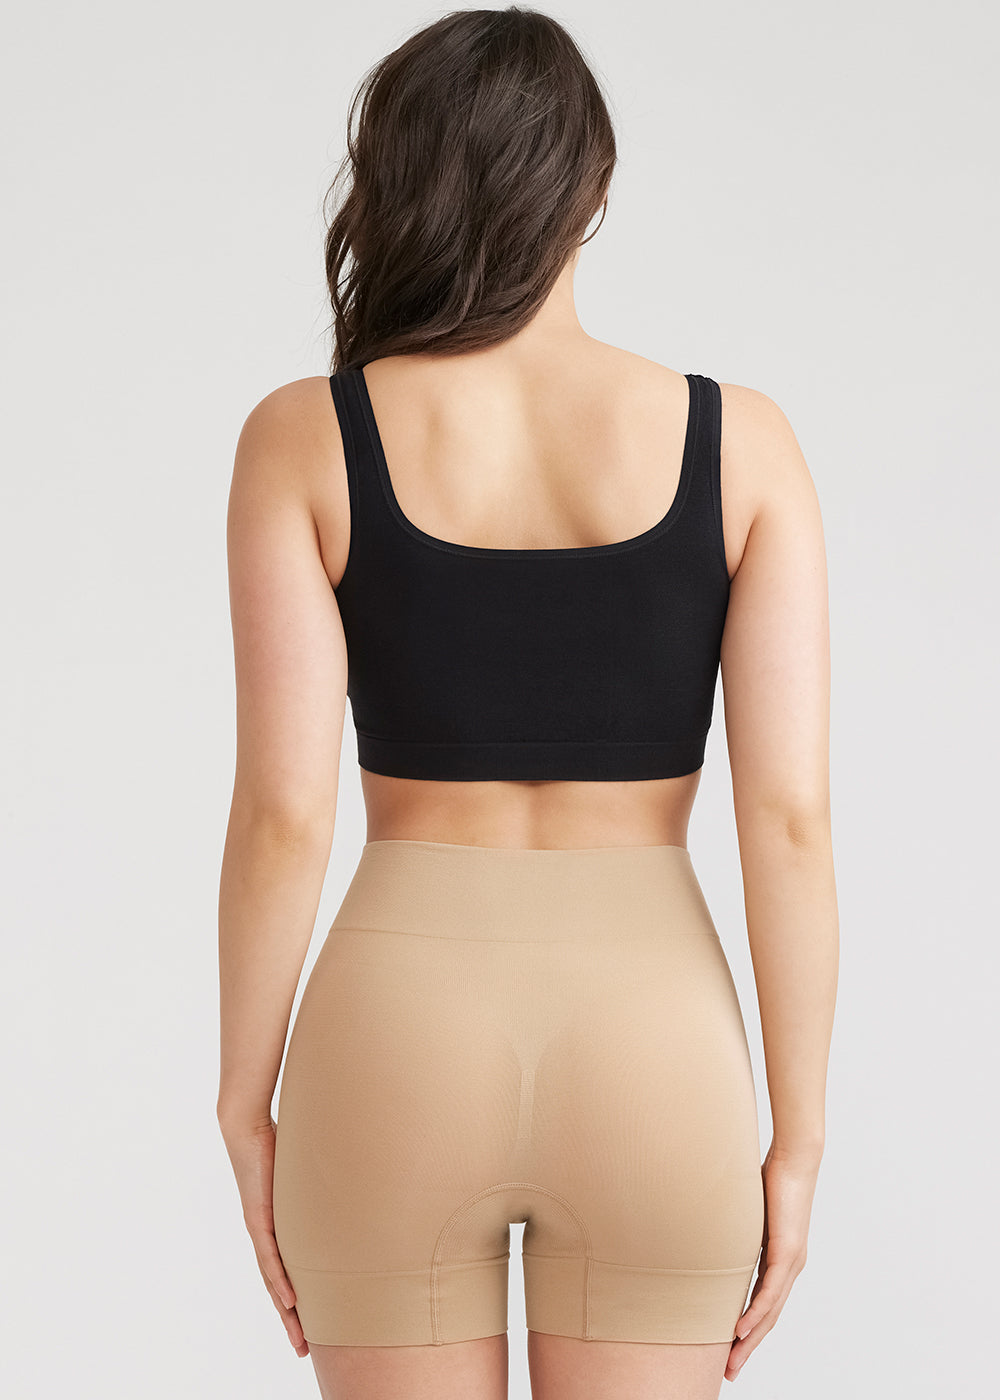 Yummie - Bria High Waist Shaping Short - Nude & Black – About the Bra